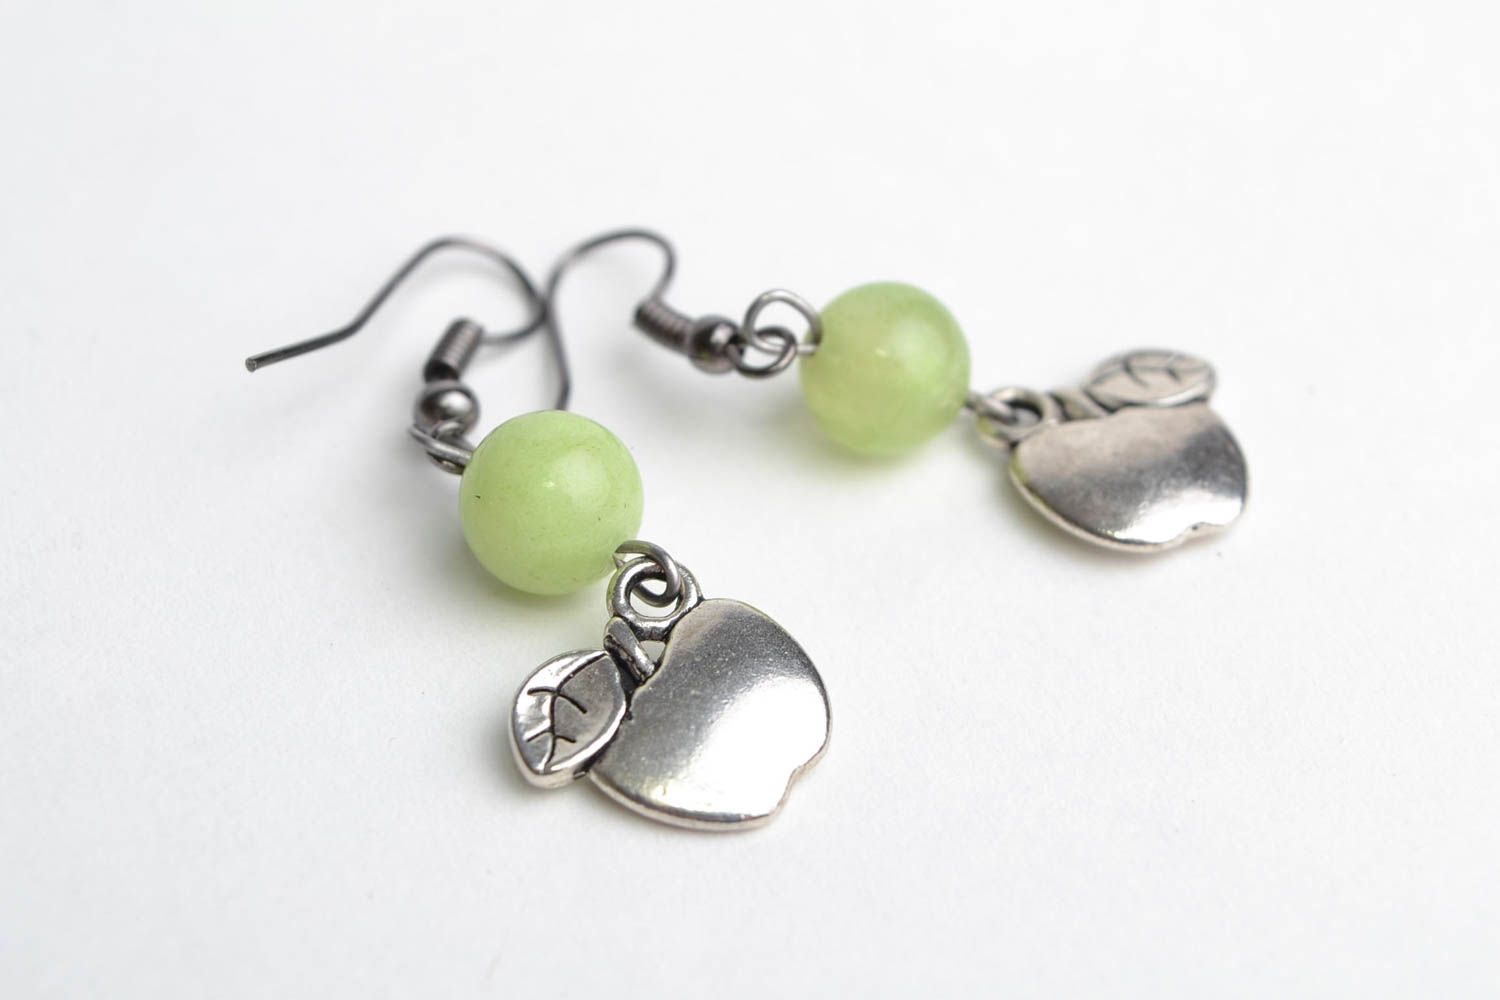 Handmade designer dangling earrings with natural agate and metal charms Apples photo 4